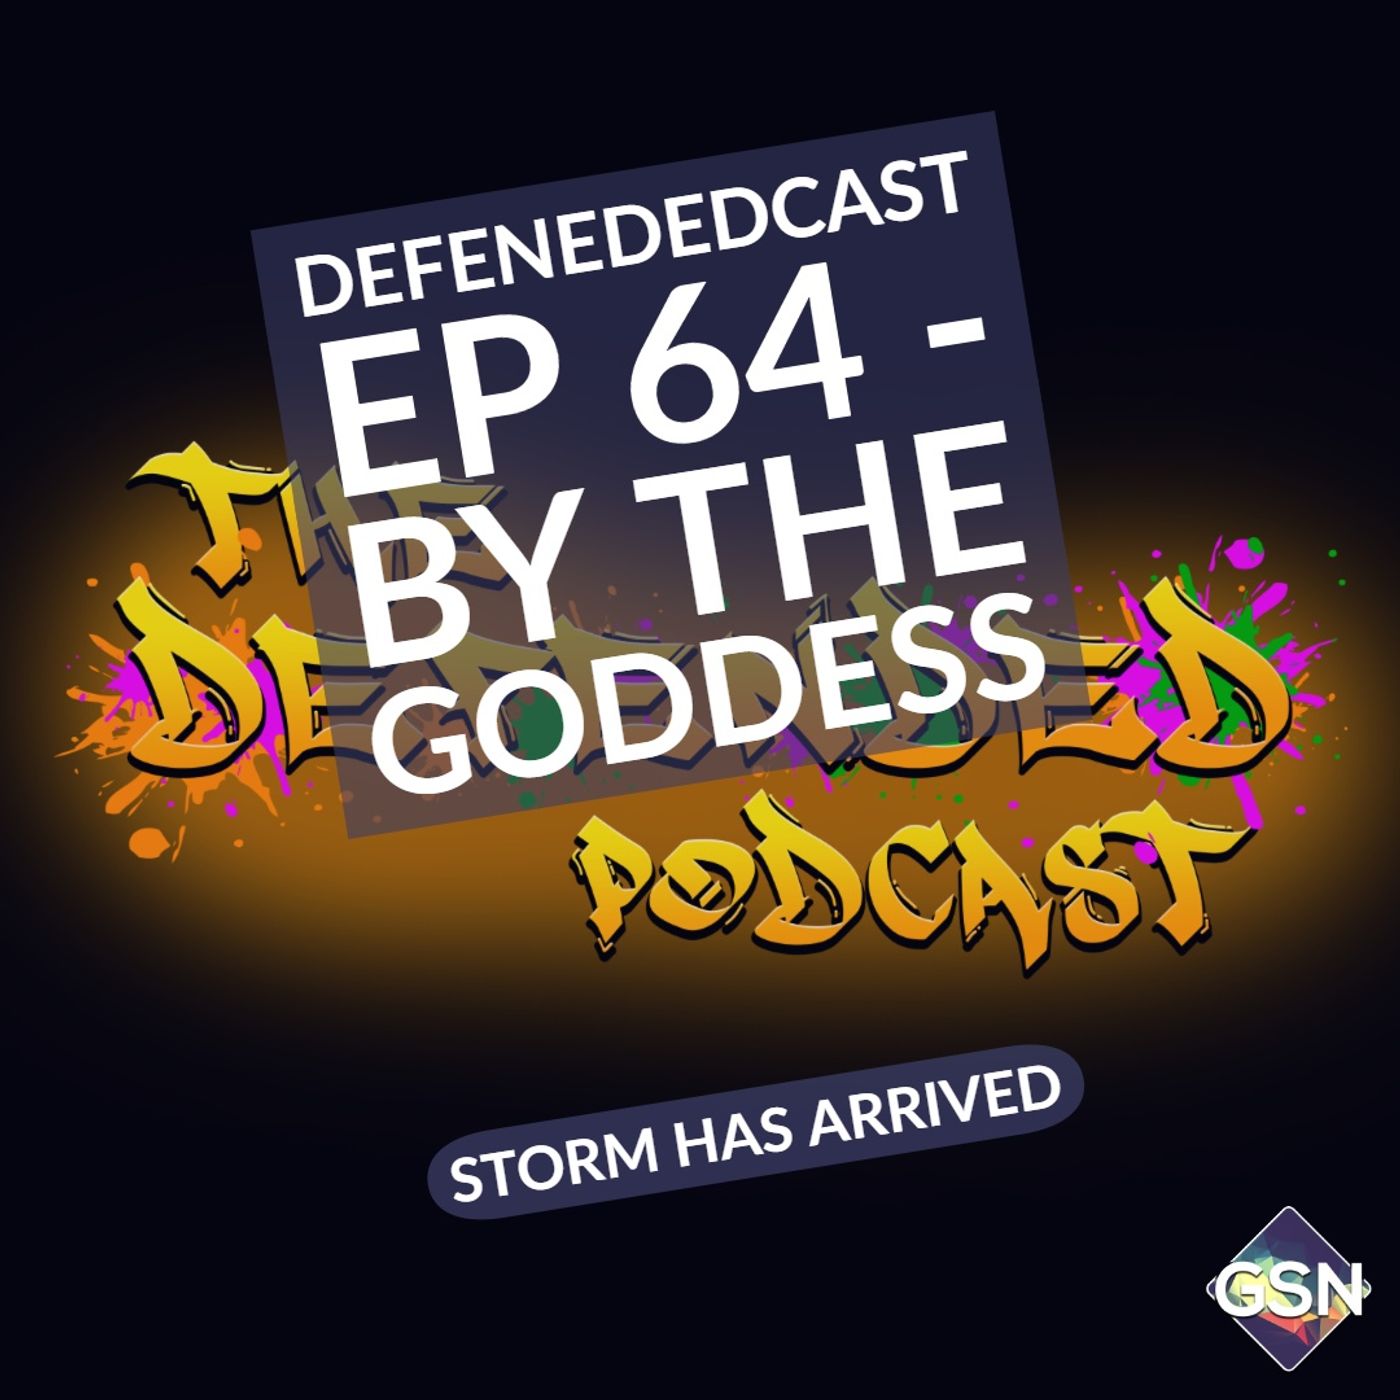 Defendedcast Ep 64 - By The Goddess